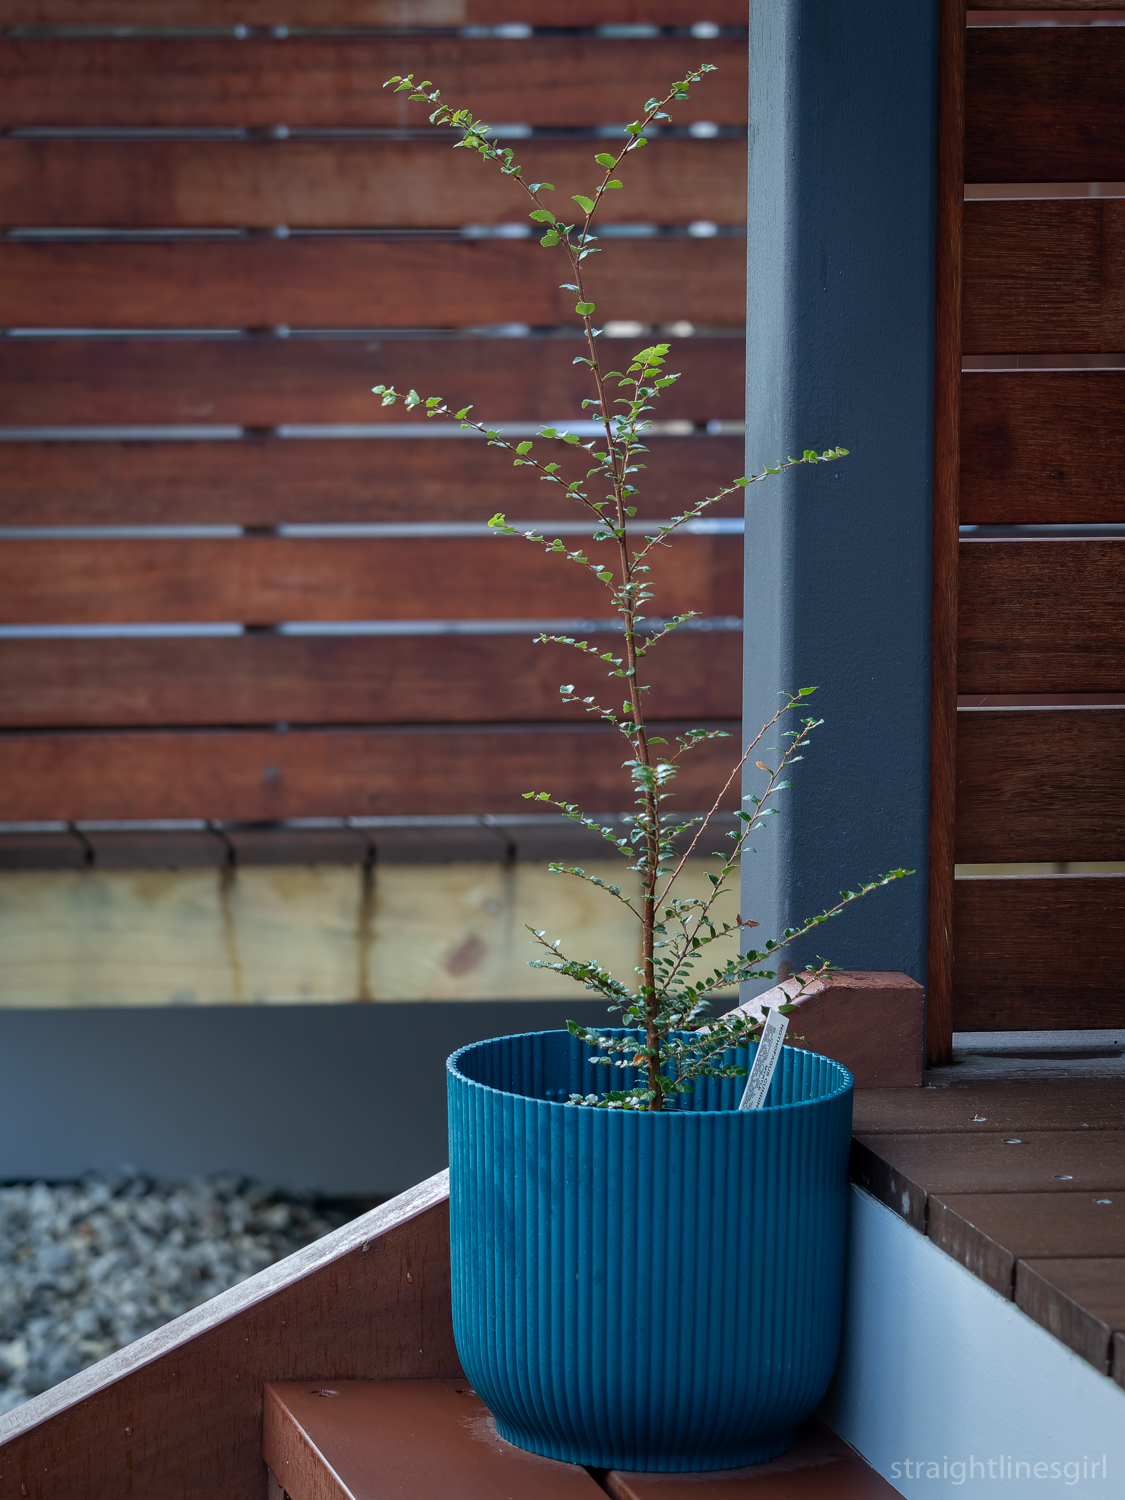 A blue-green pot with a small plant on a wooden step in front of a wood panelled wall